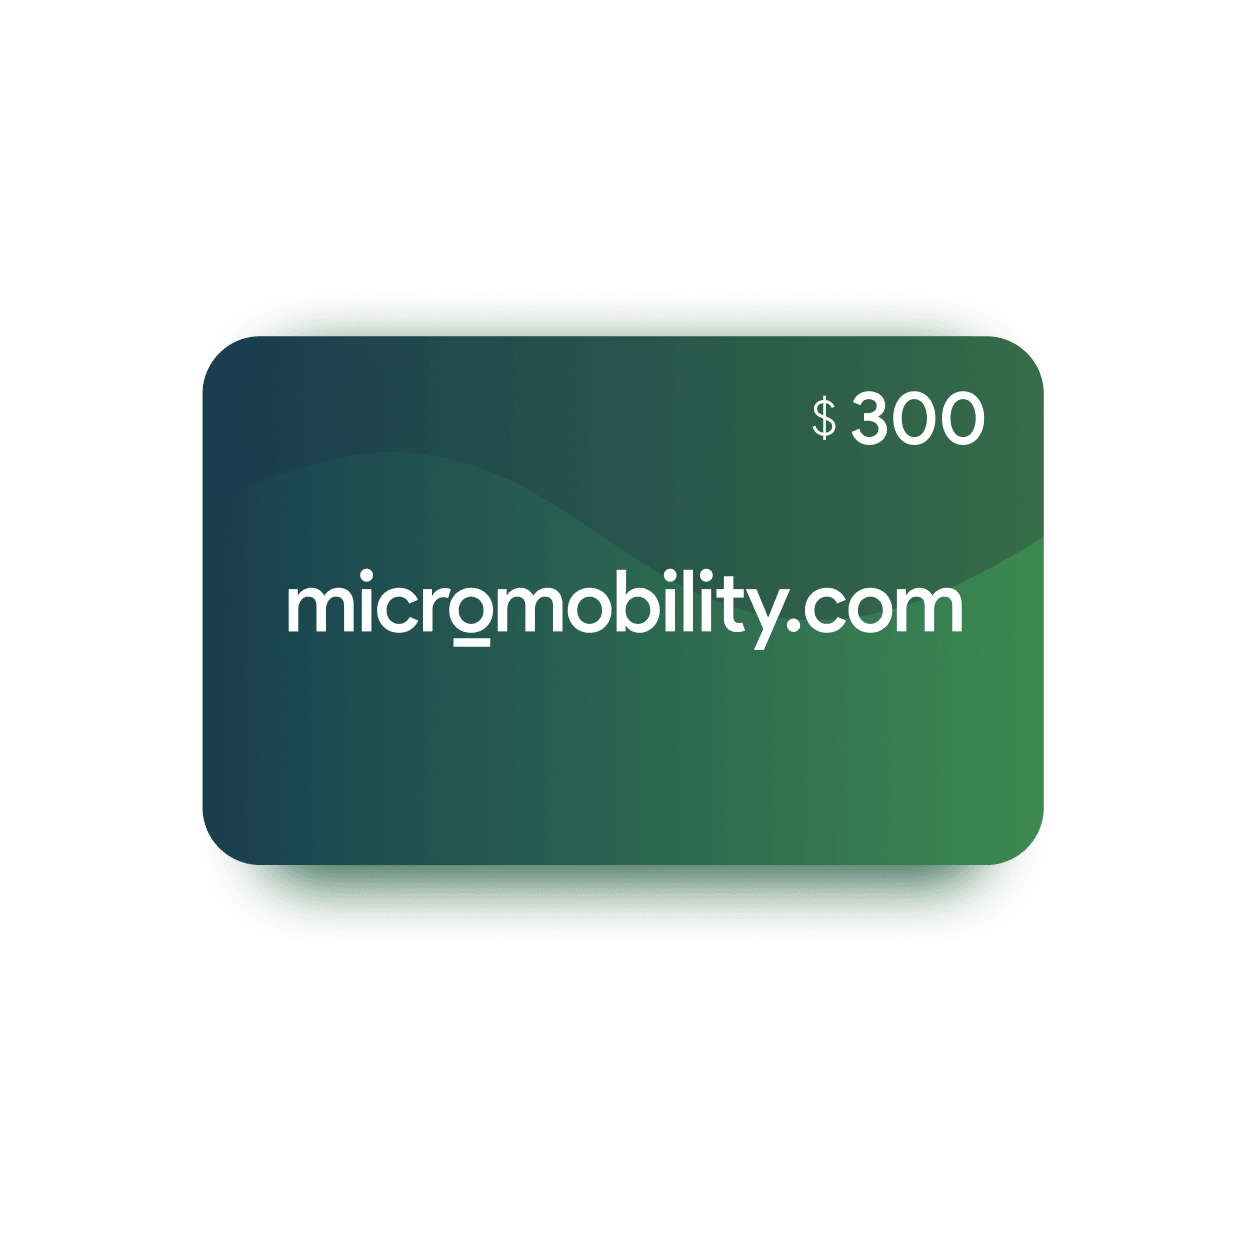 Giftcard - micromobility.com